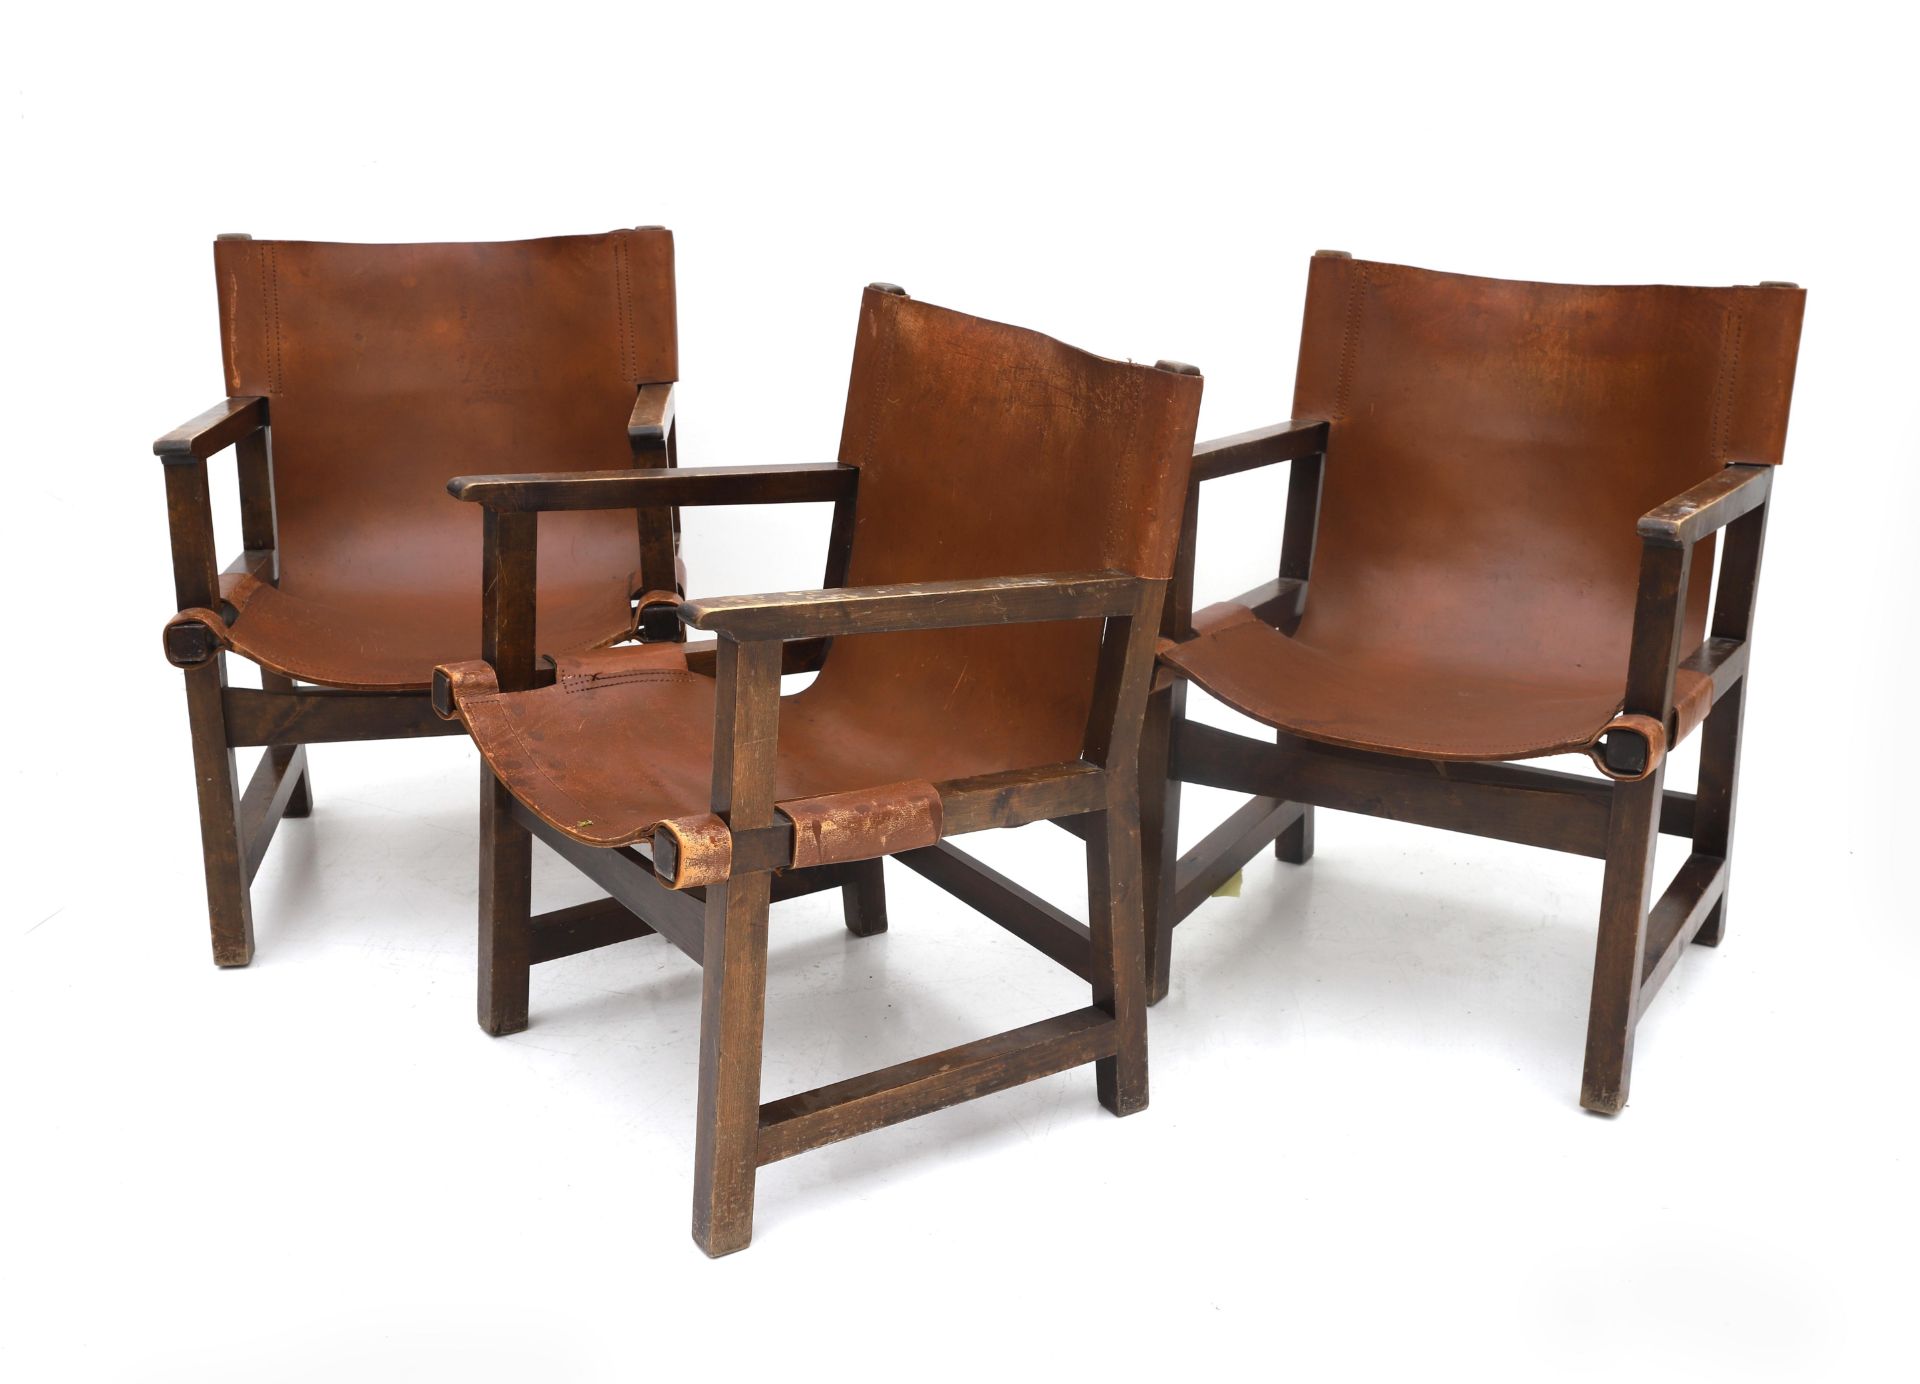 Paco Muñoz (1929-2009) Three Spanish lacquered wooden armchairs with brown saddle leather seats,